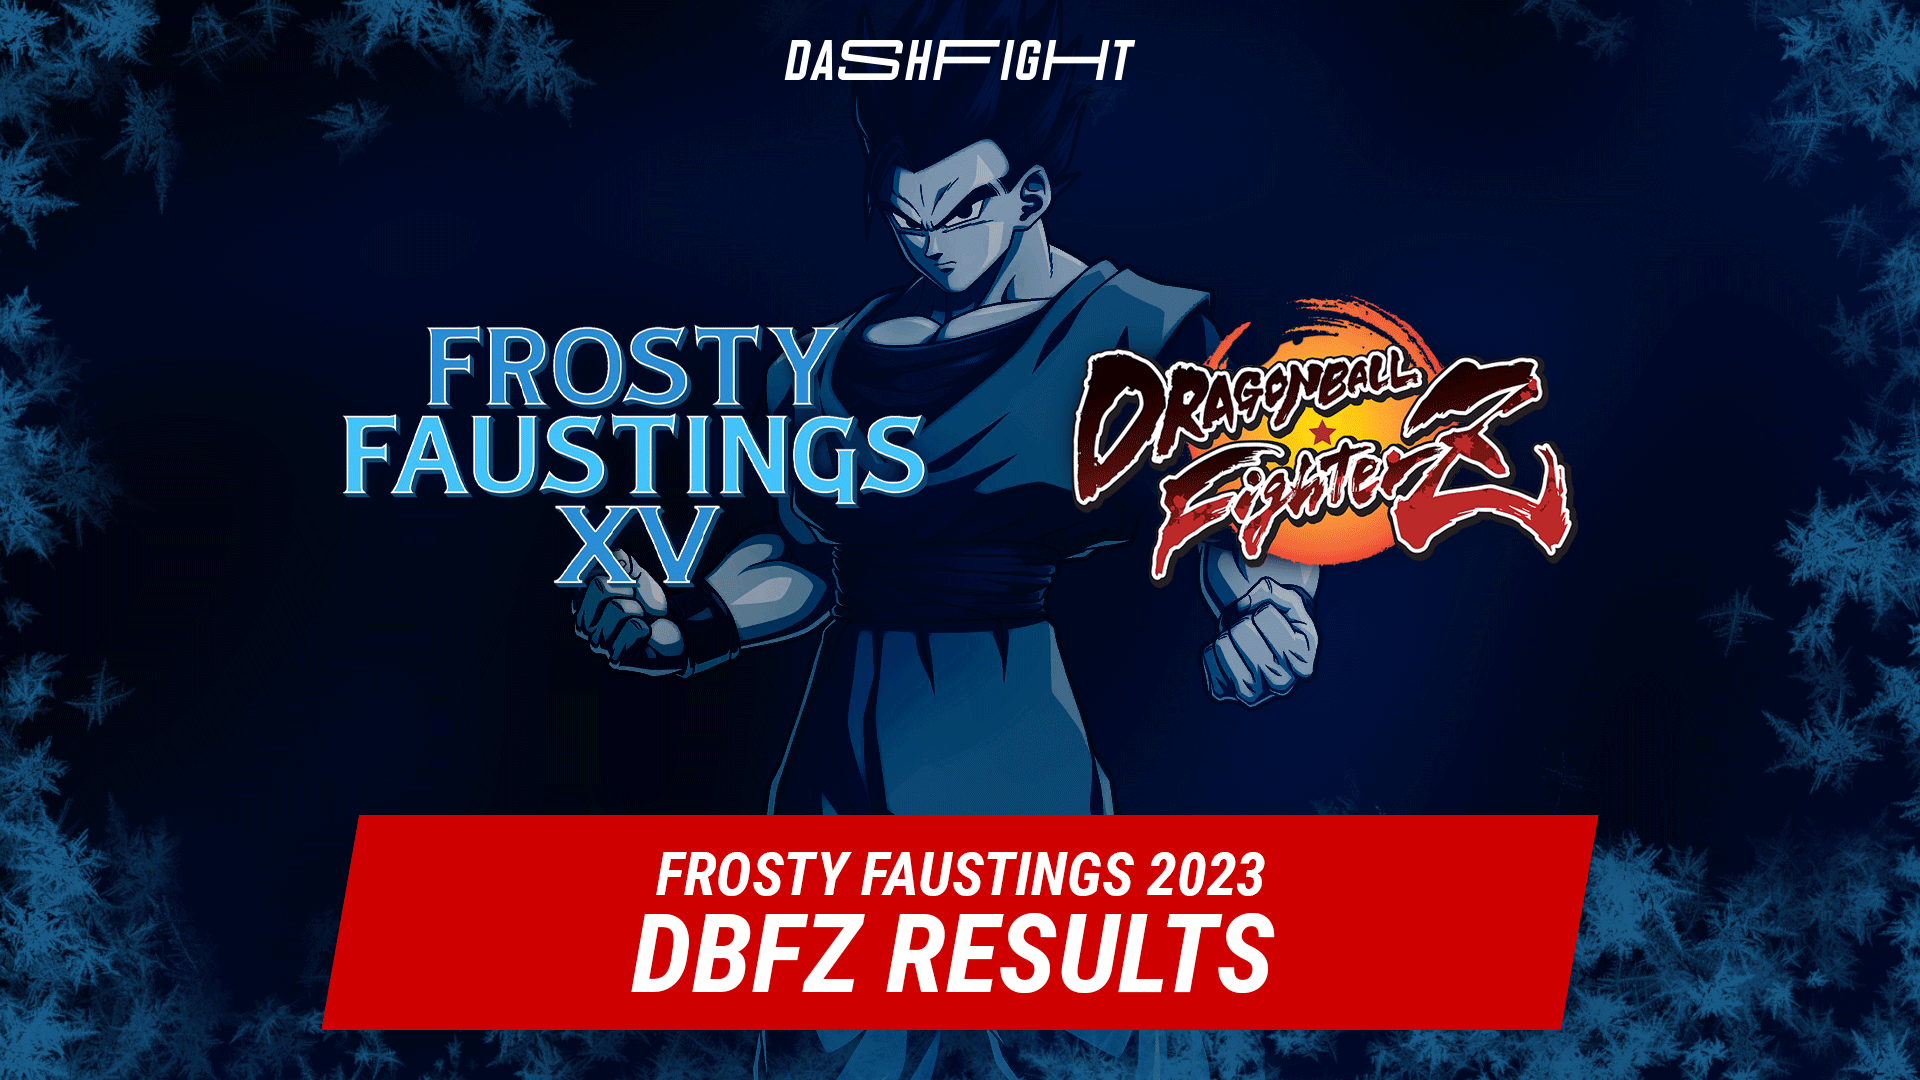 DBFZ at Frosty Faustings XV: On the Verge of Defeat